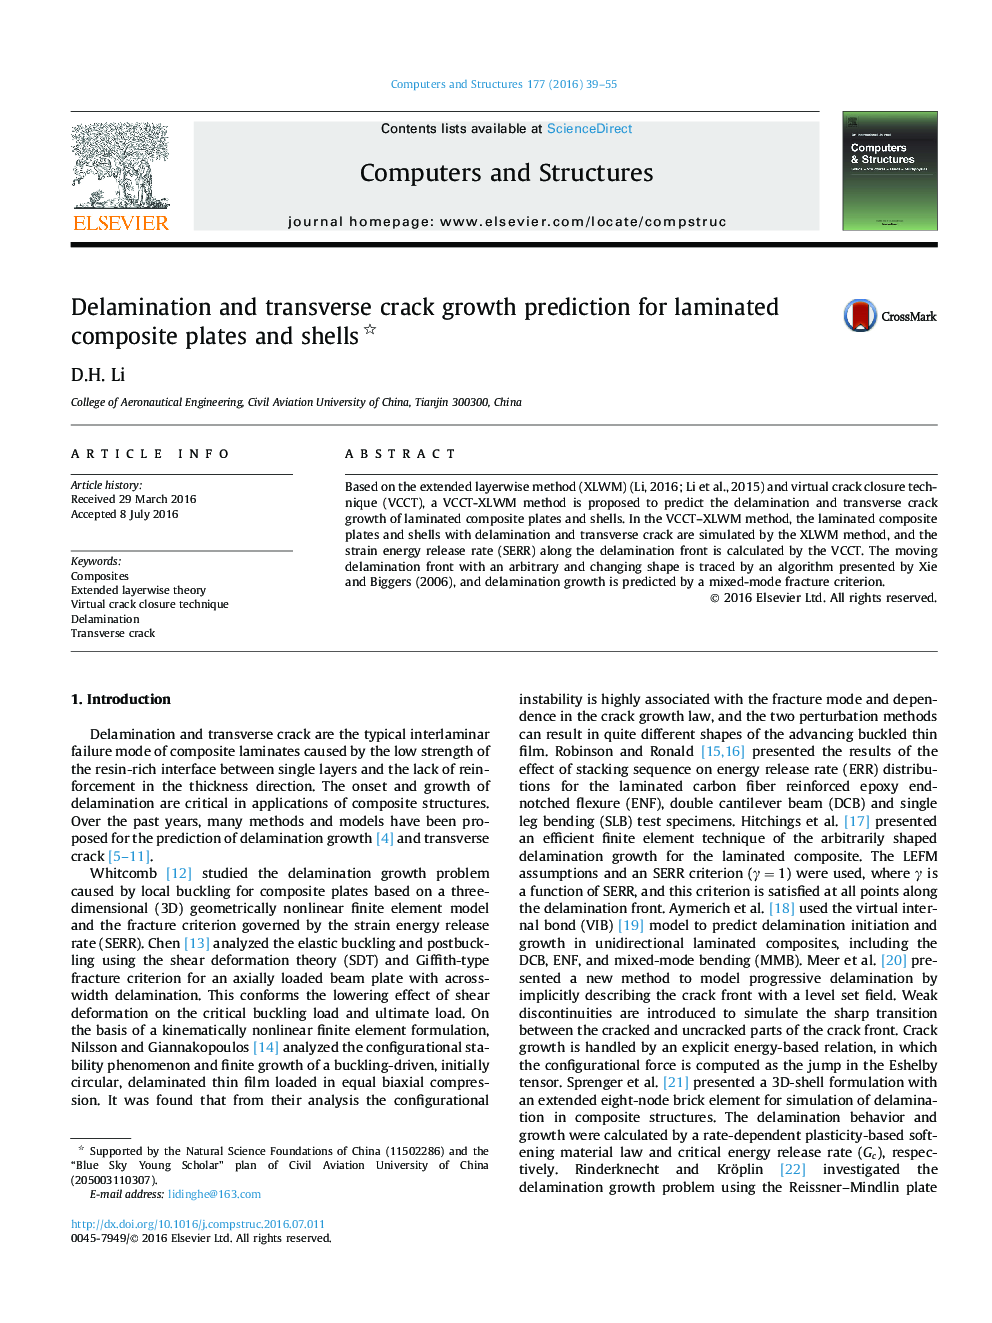 Delamination and transverse crack growth prediction for laminated composite plates and shells